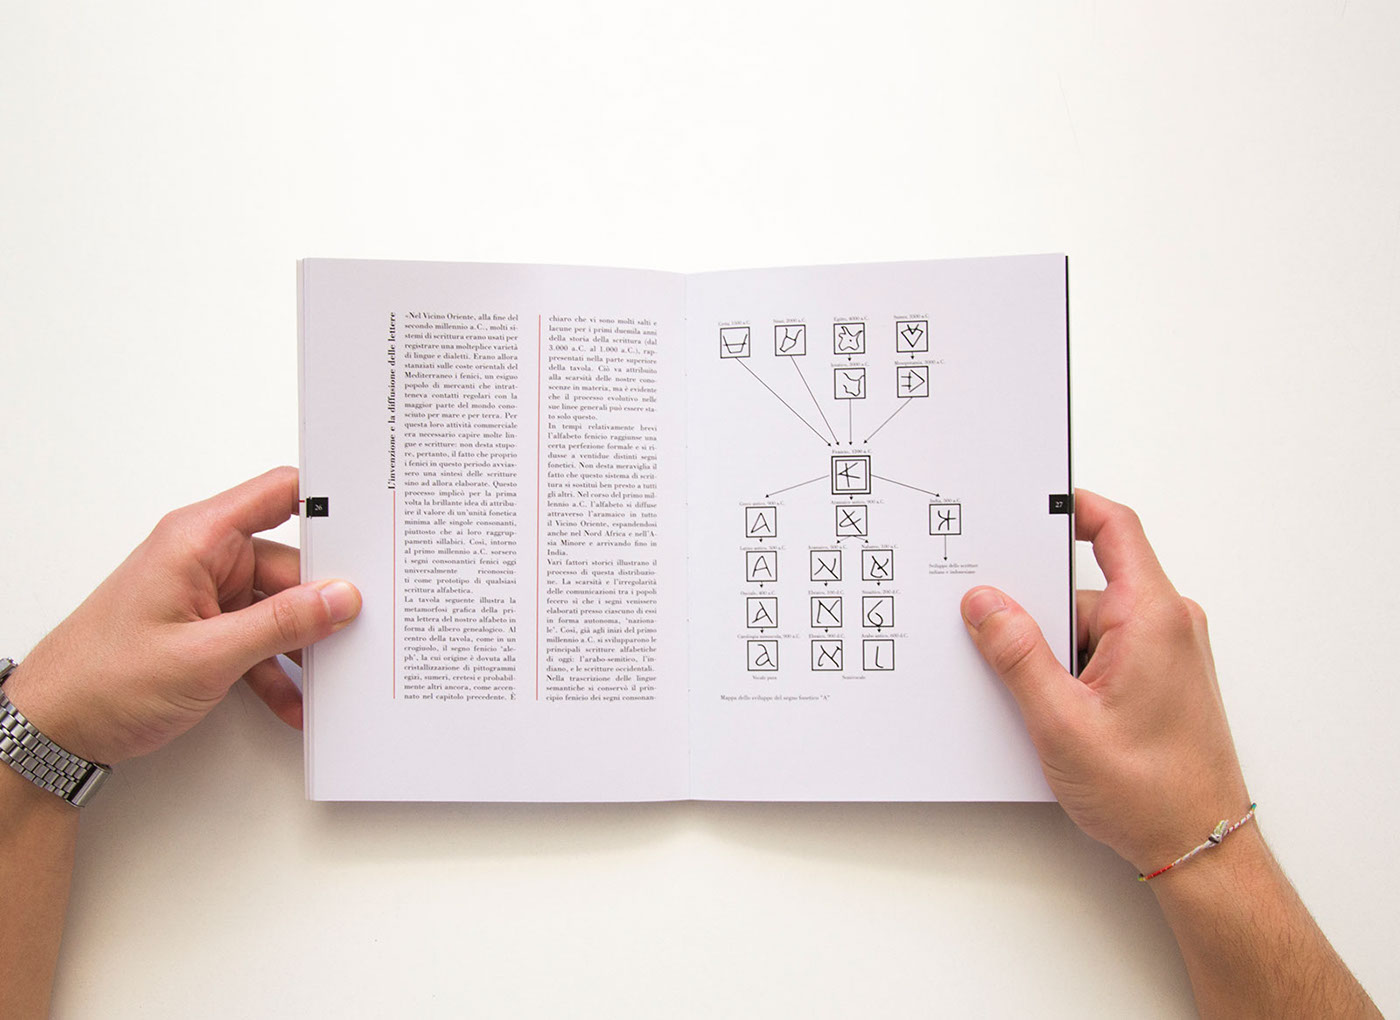 type design manual book anatomy font degree thesis technical catania accademia